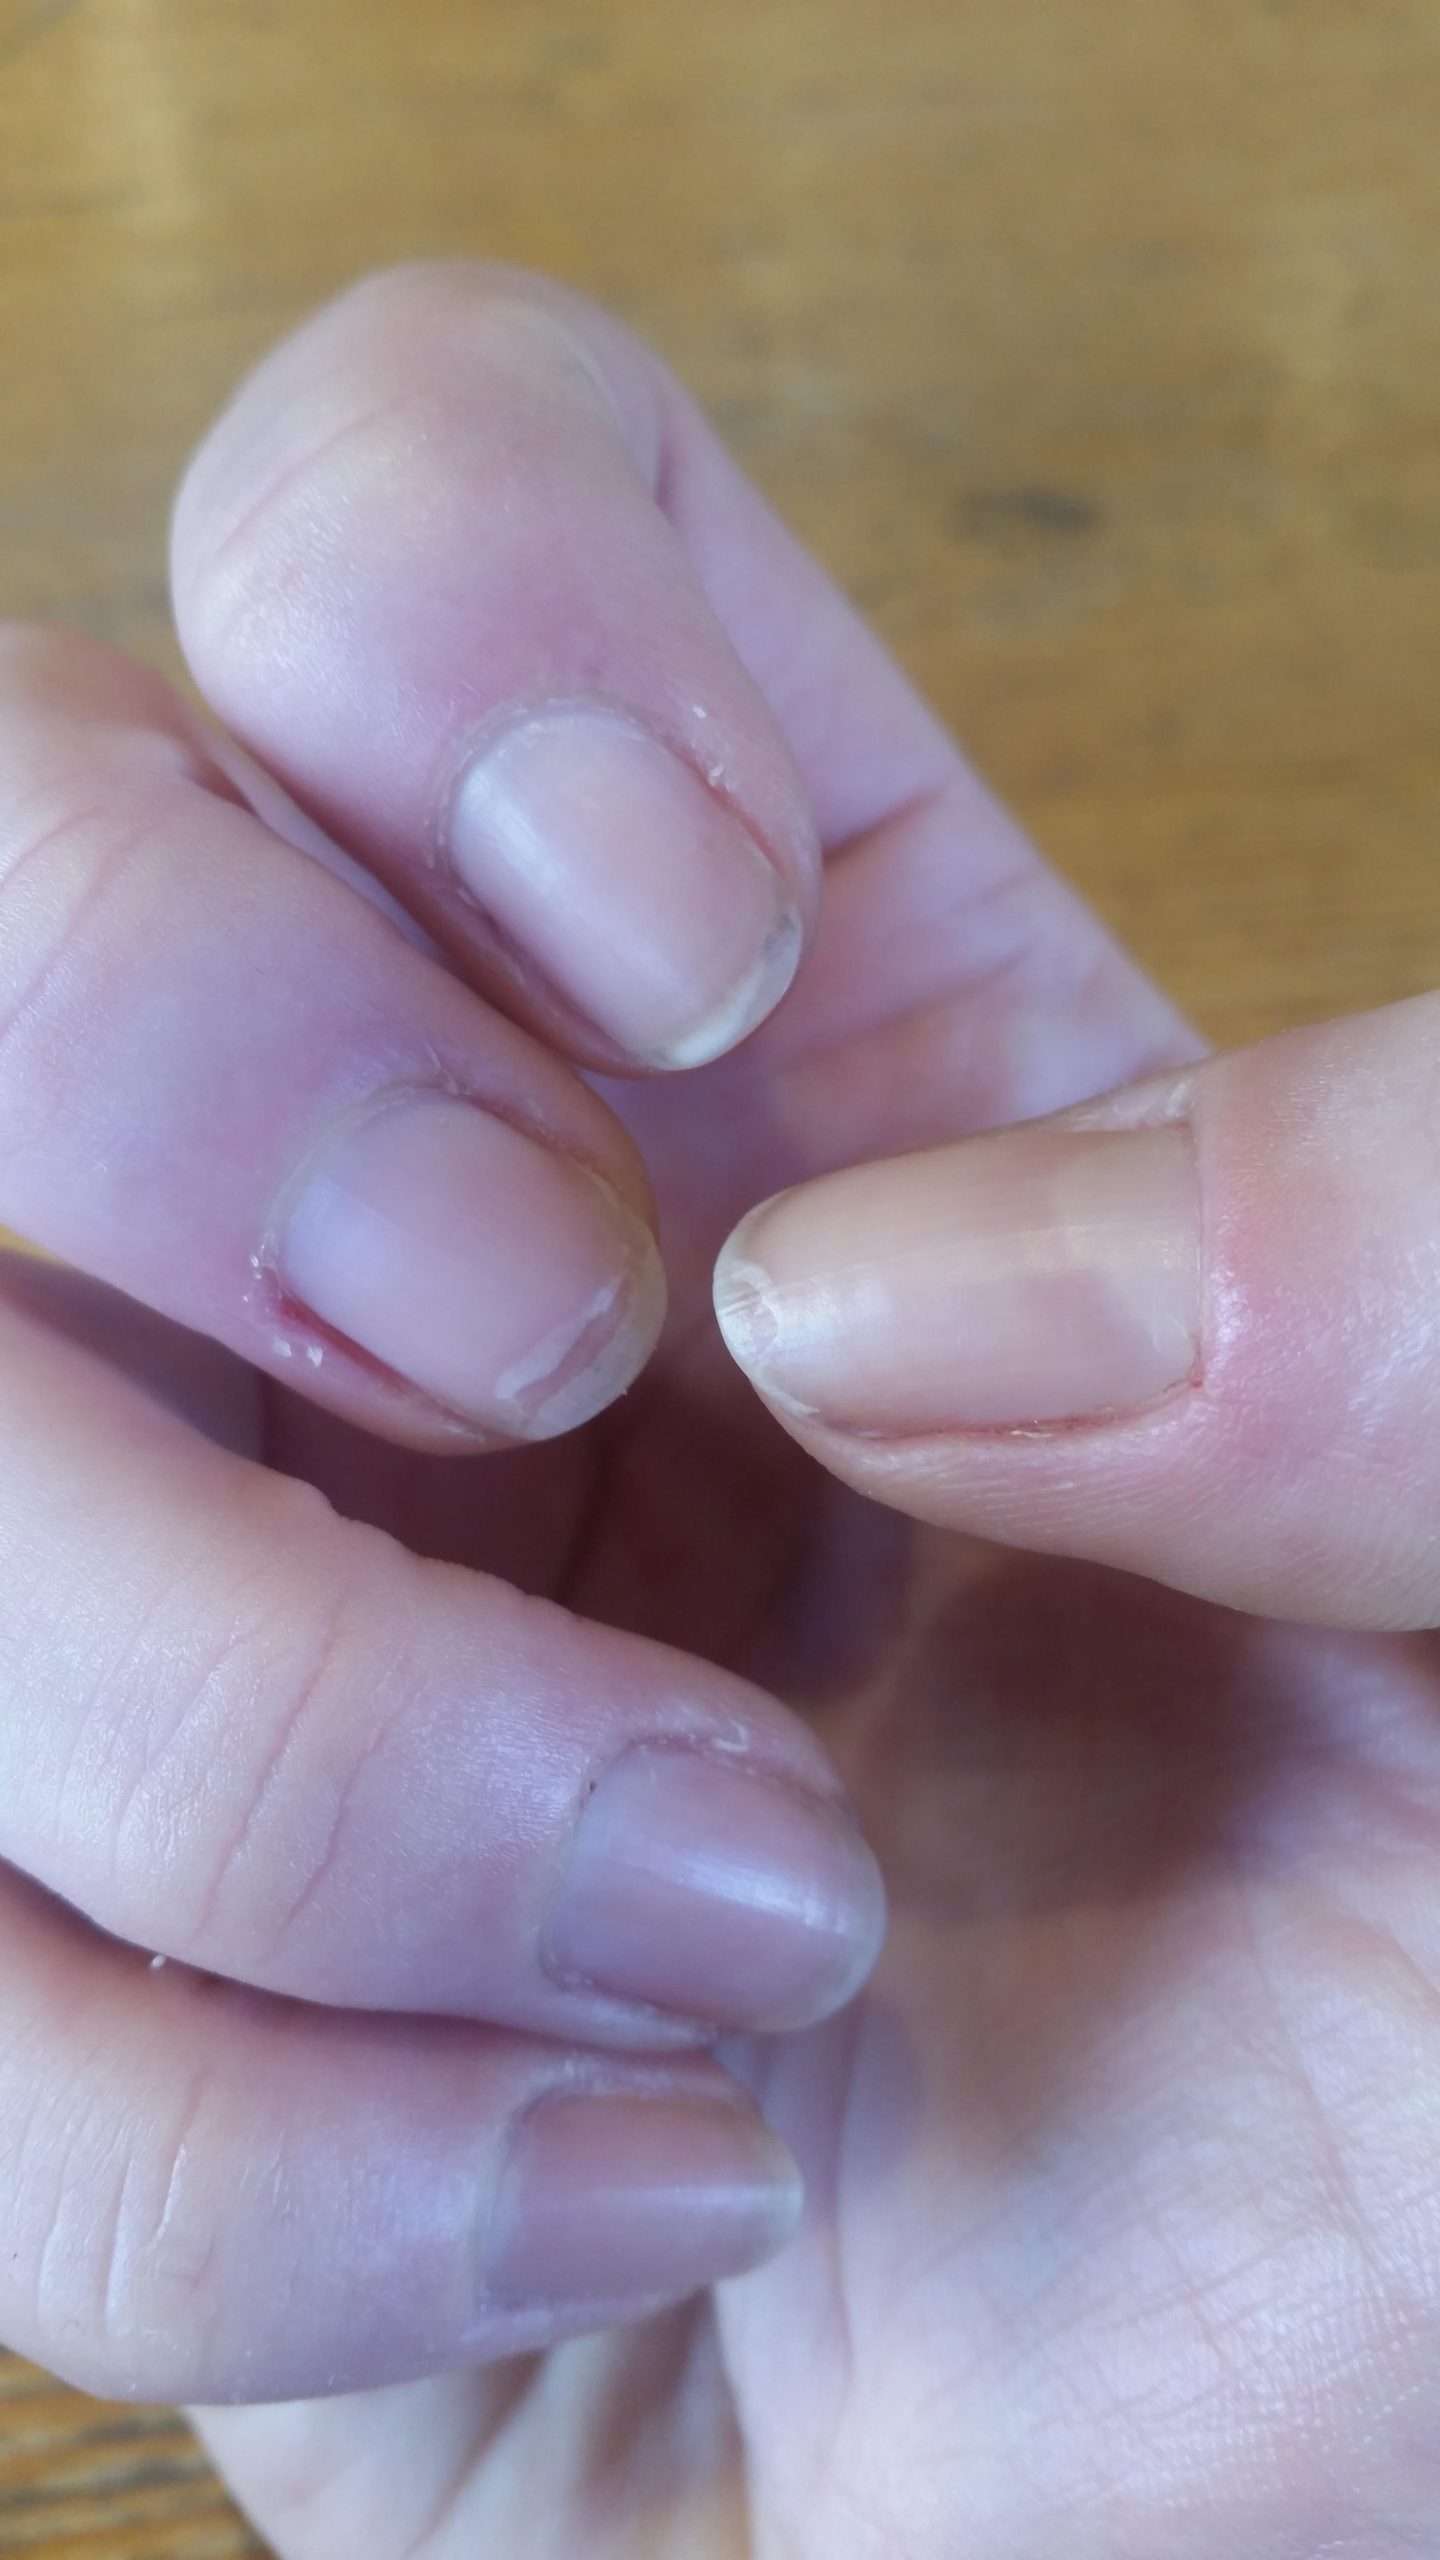 Help. Suggestions needed on how to better care for my nails to stop ...